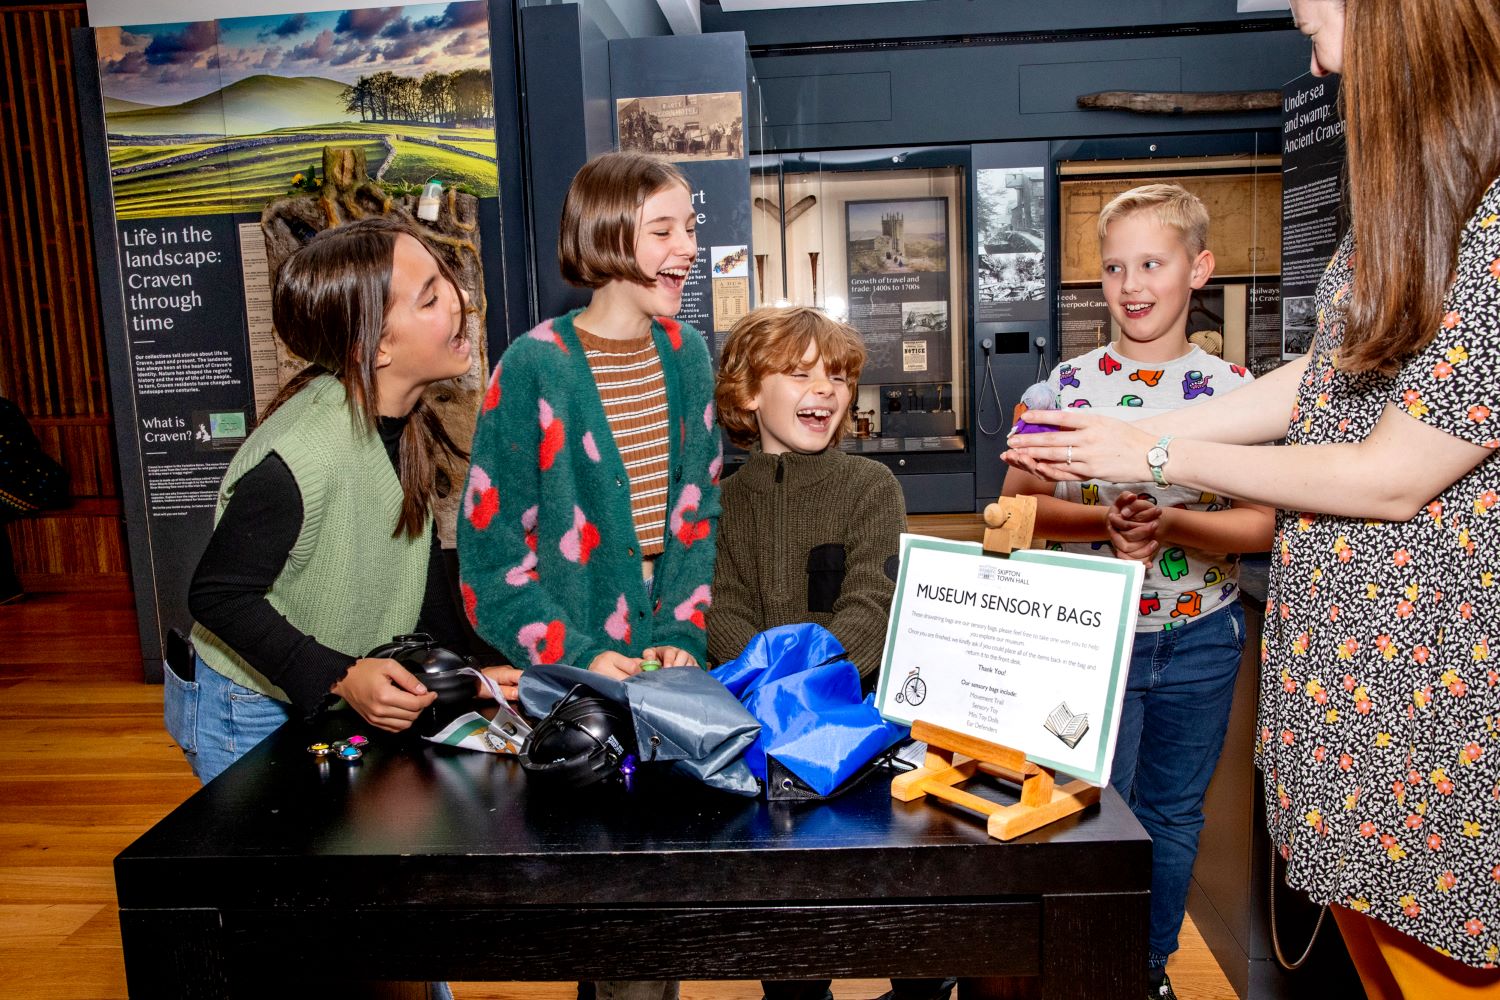 A group of four children gathered round a desk filled with objects and a sign reading museum sensory bags. A museum staff member is holding out a toy to them and they are looking at it and laughing.